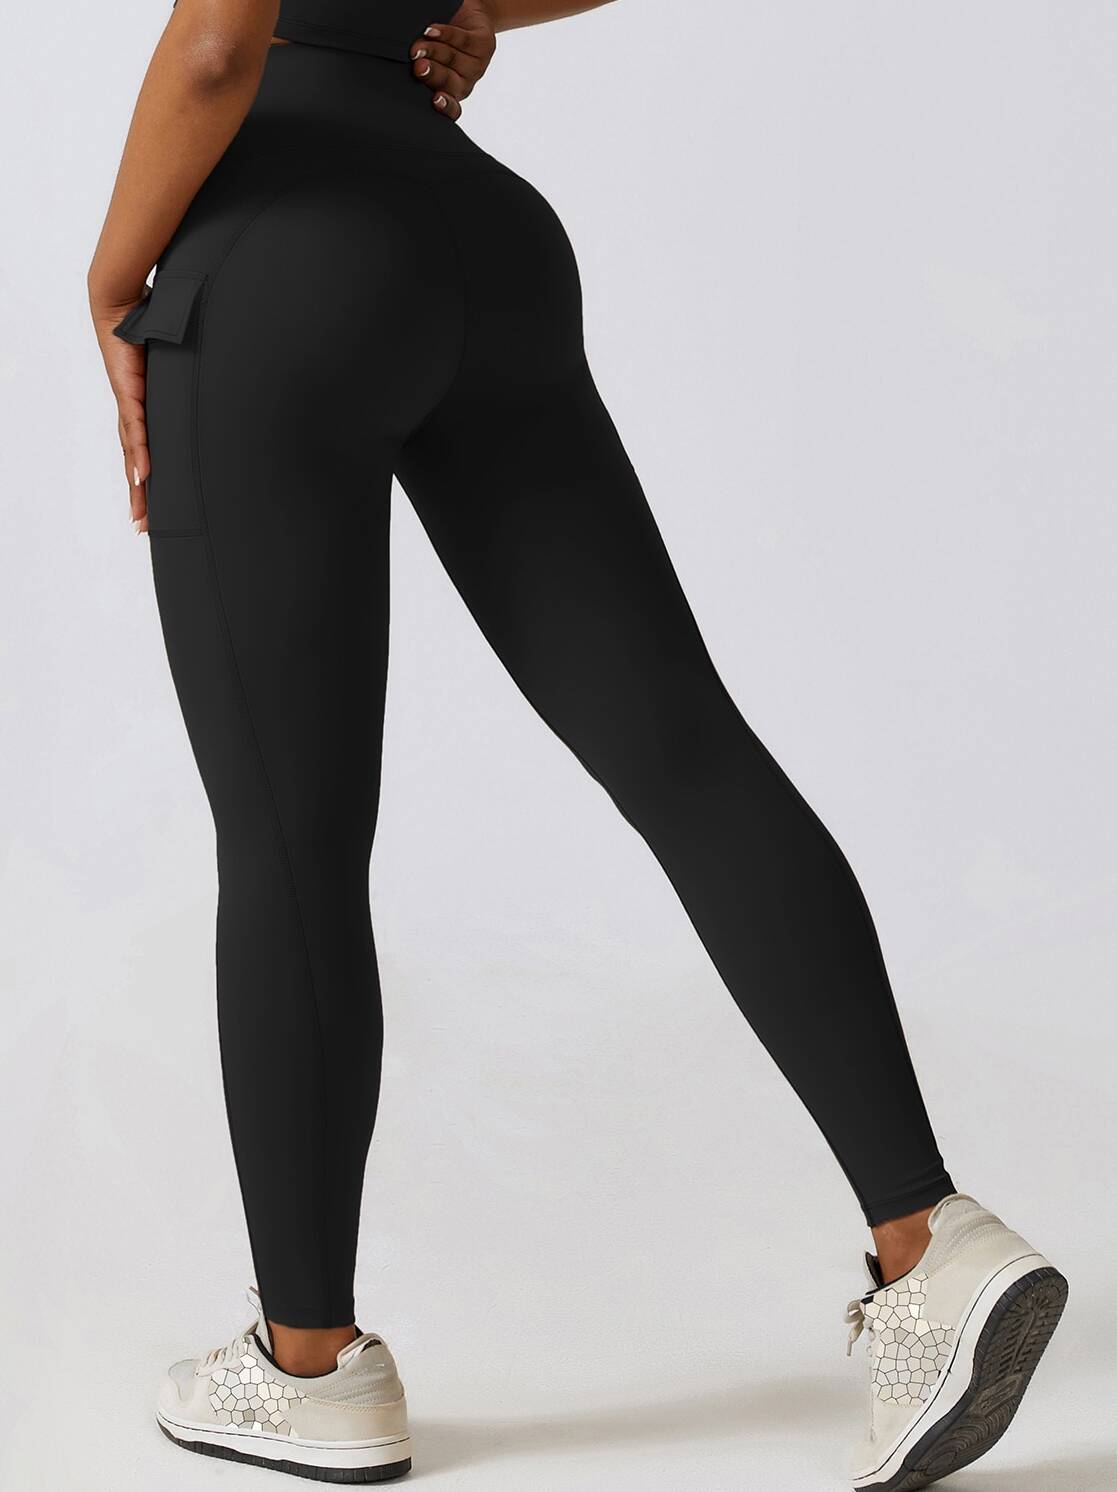 Fabletics - The Trinity Pocket Legging is your new yoga